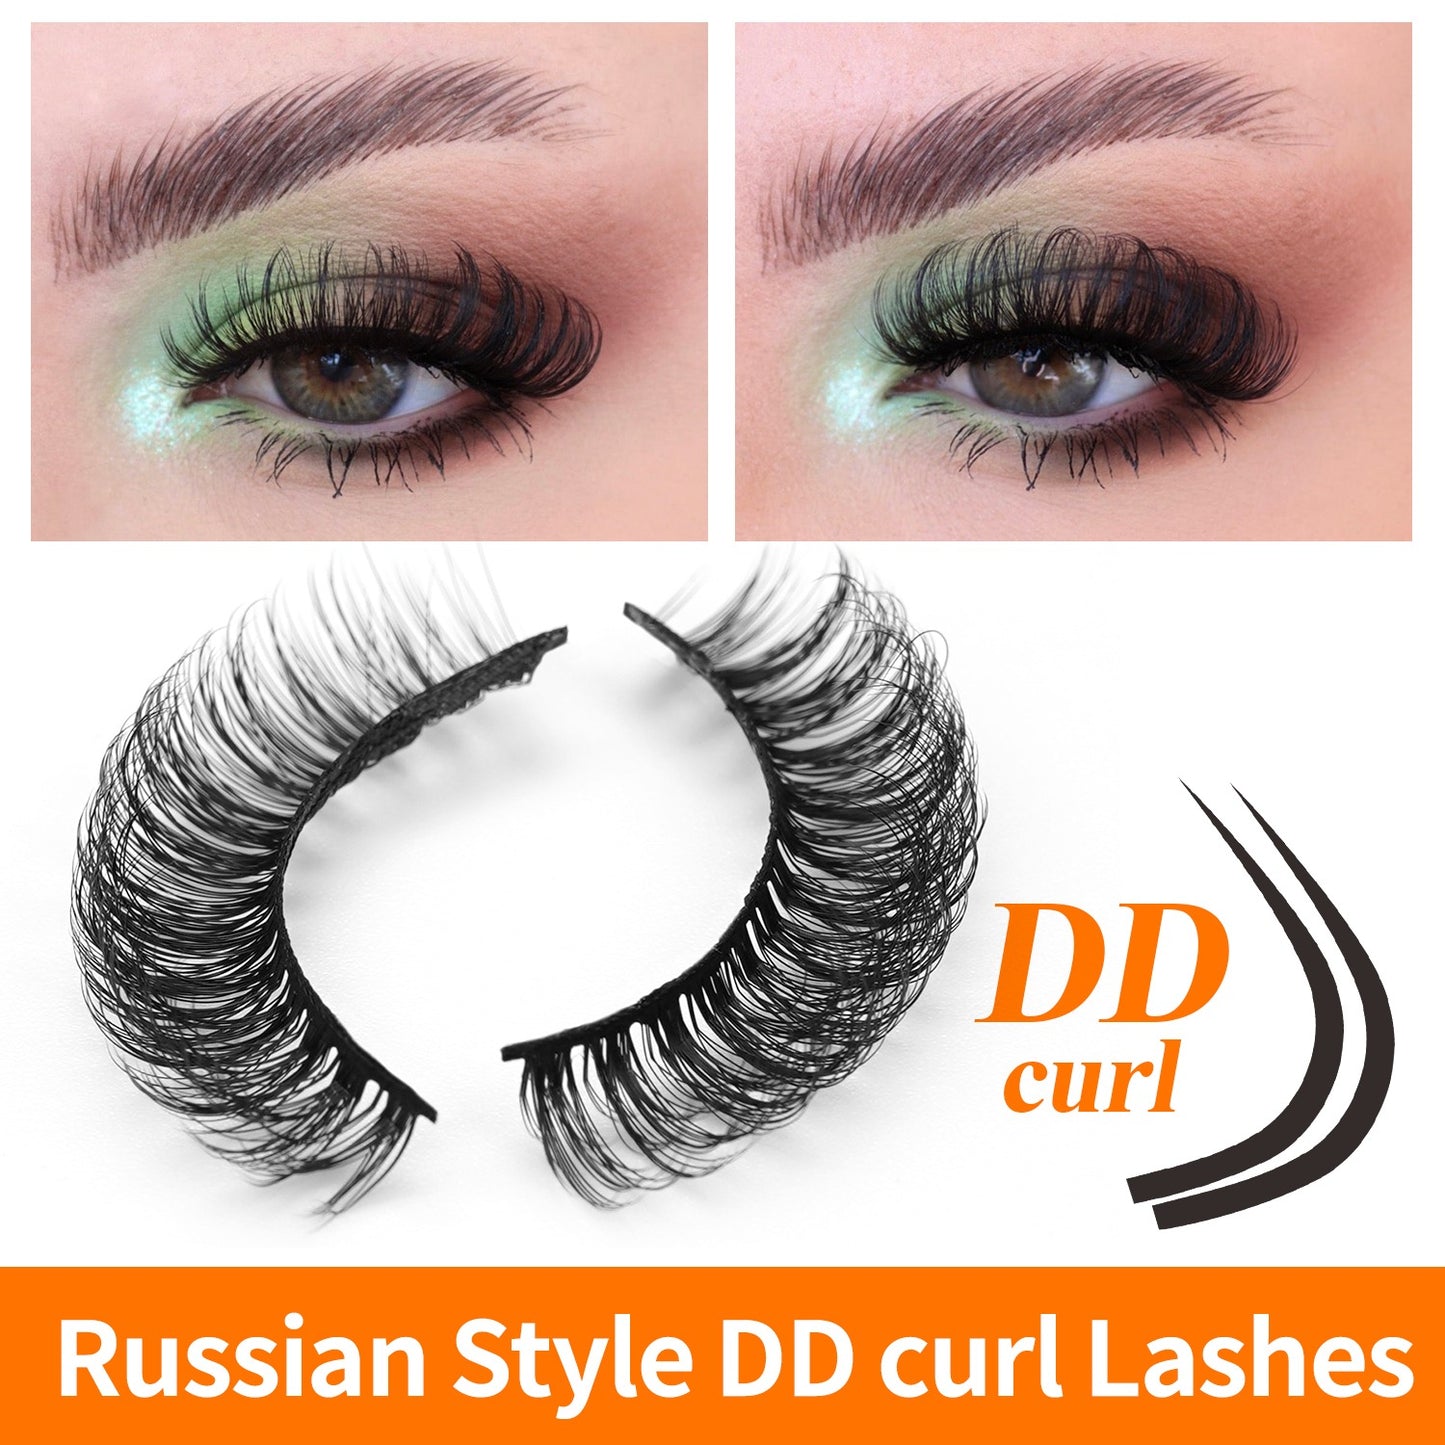 Image of Russian-style curl lashes, showcasing their dramatic curl and volume, ideal for a glamorous eye makeup look. More Lips More Lashes